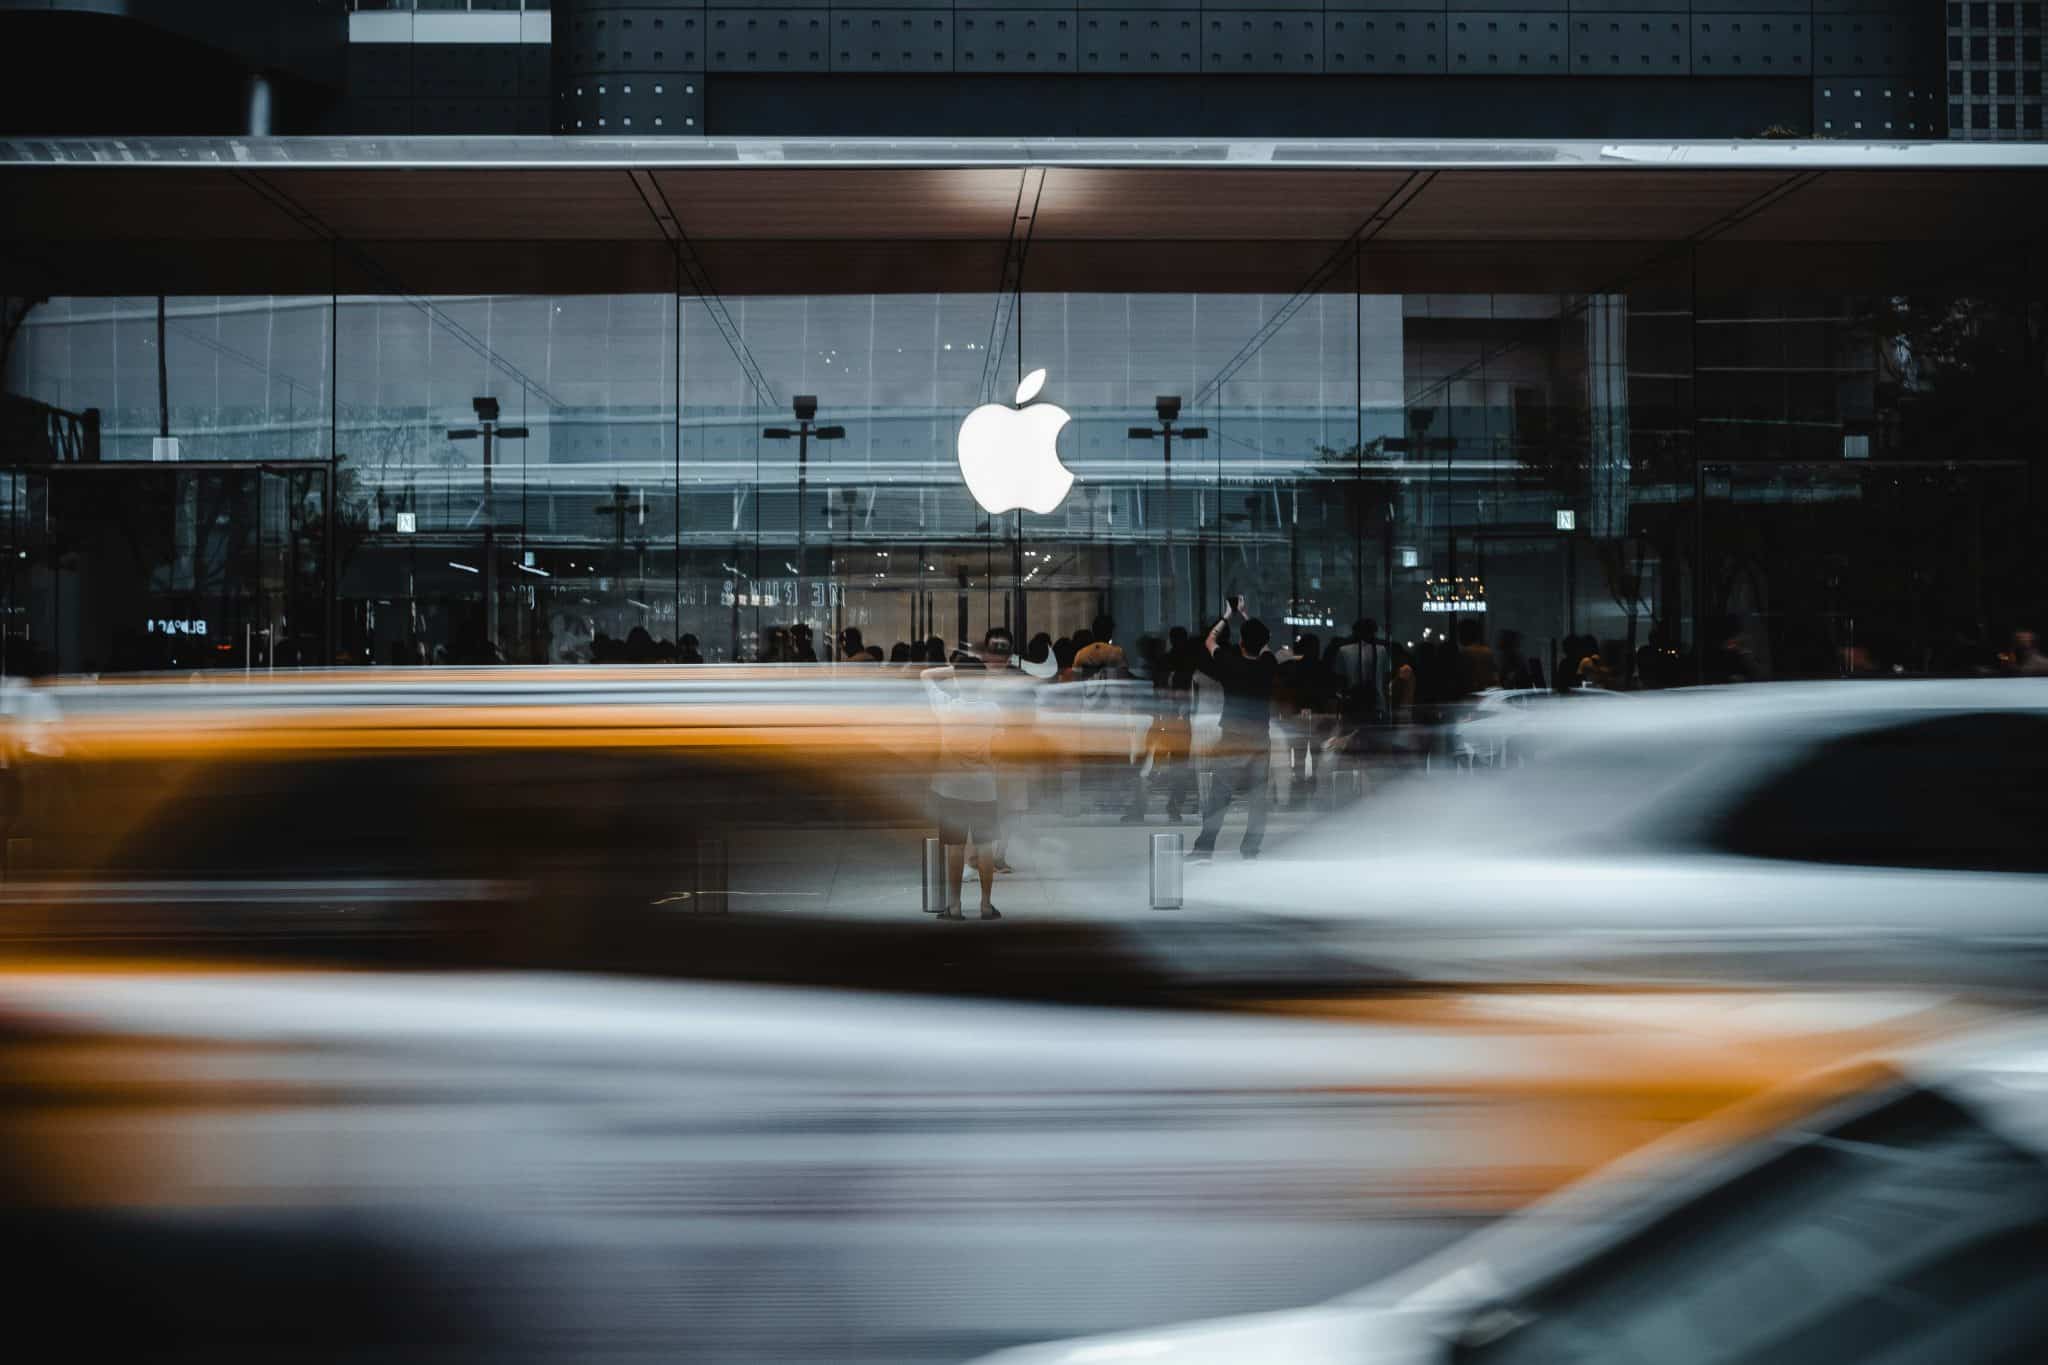 Apple Ramped Up Its ‘Secret’ Autonomous Car Project With Increased Testing, Says Report